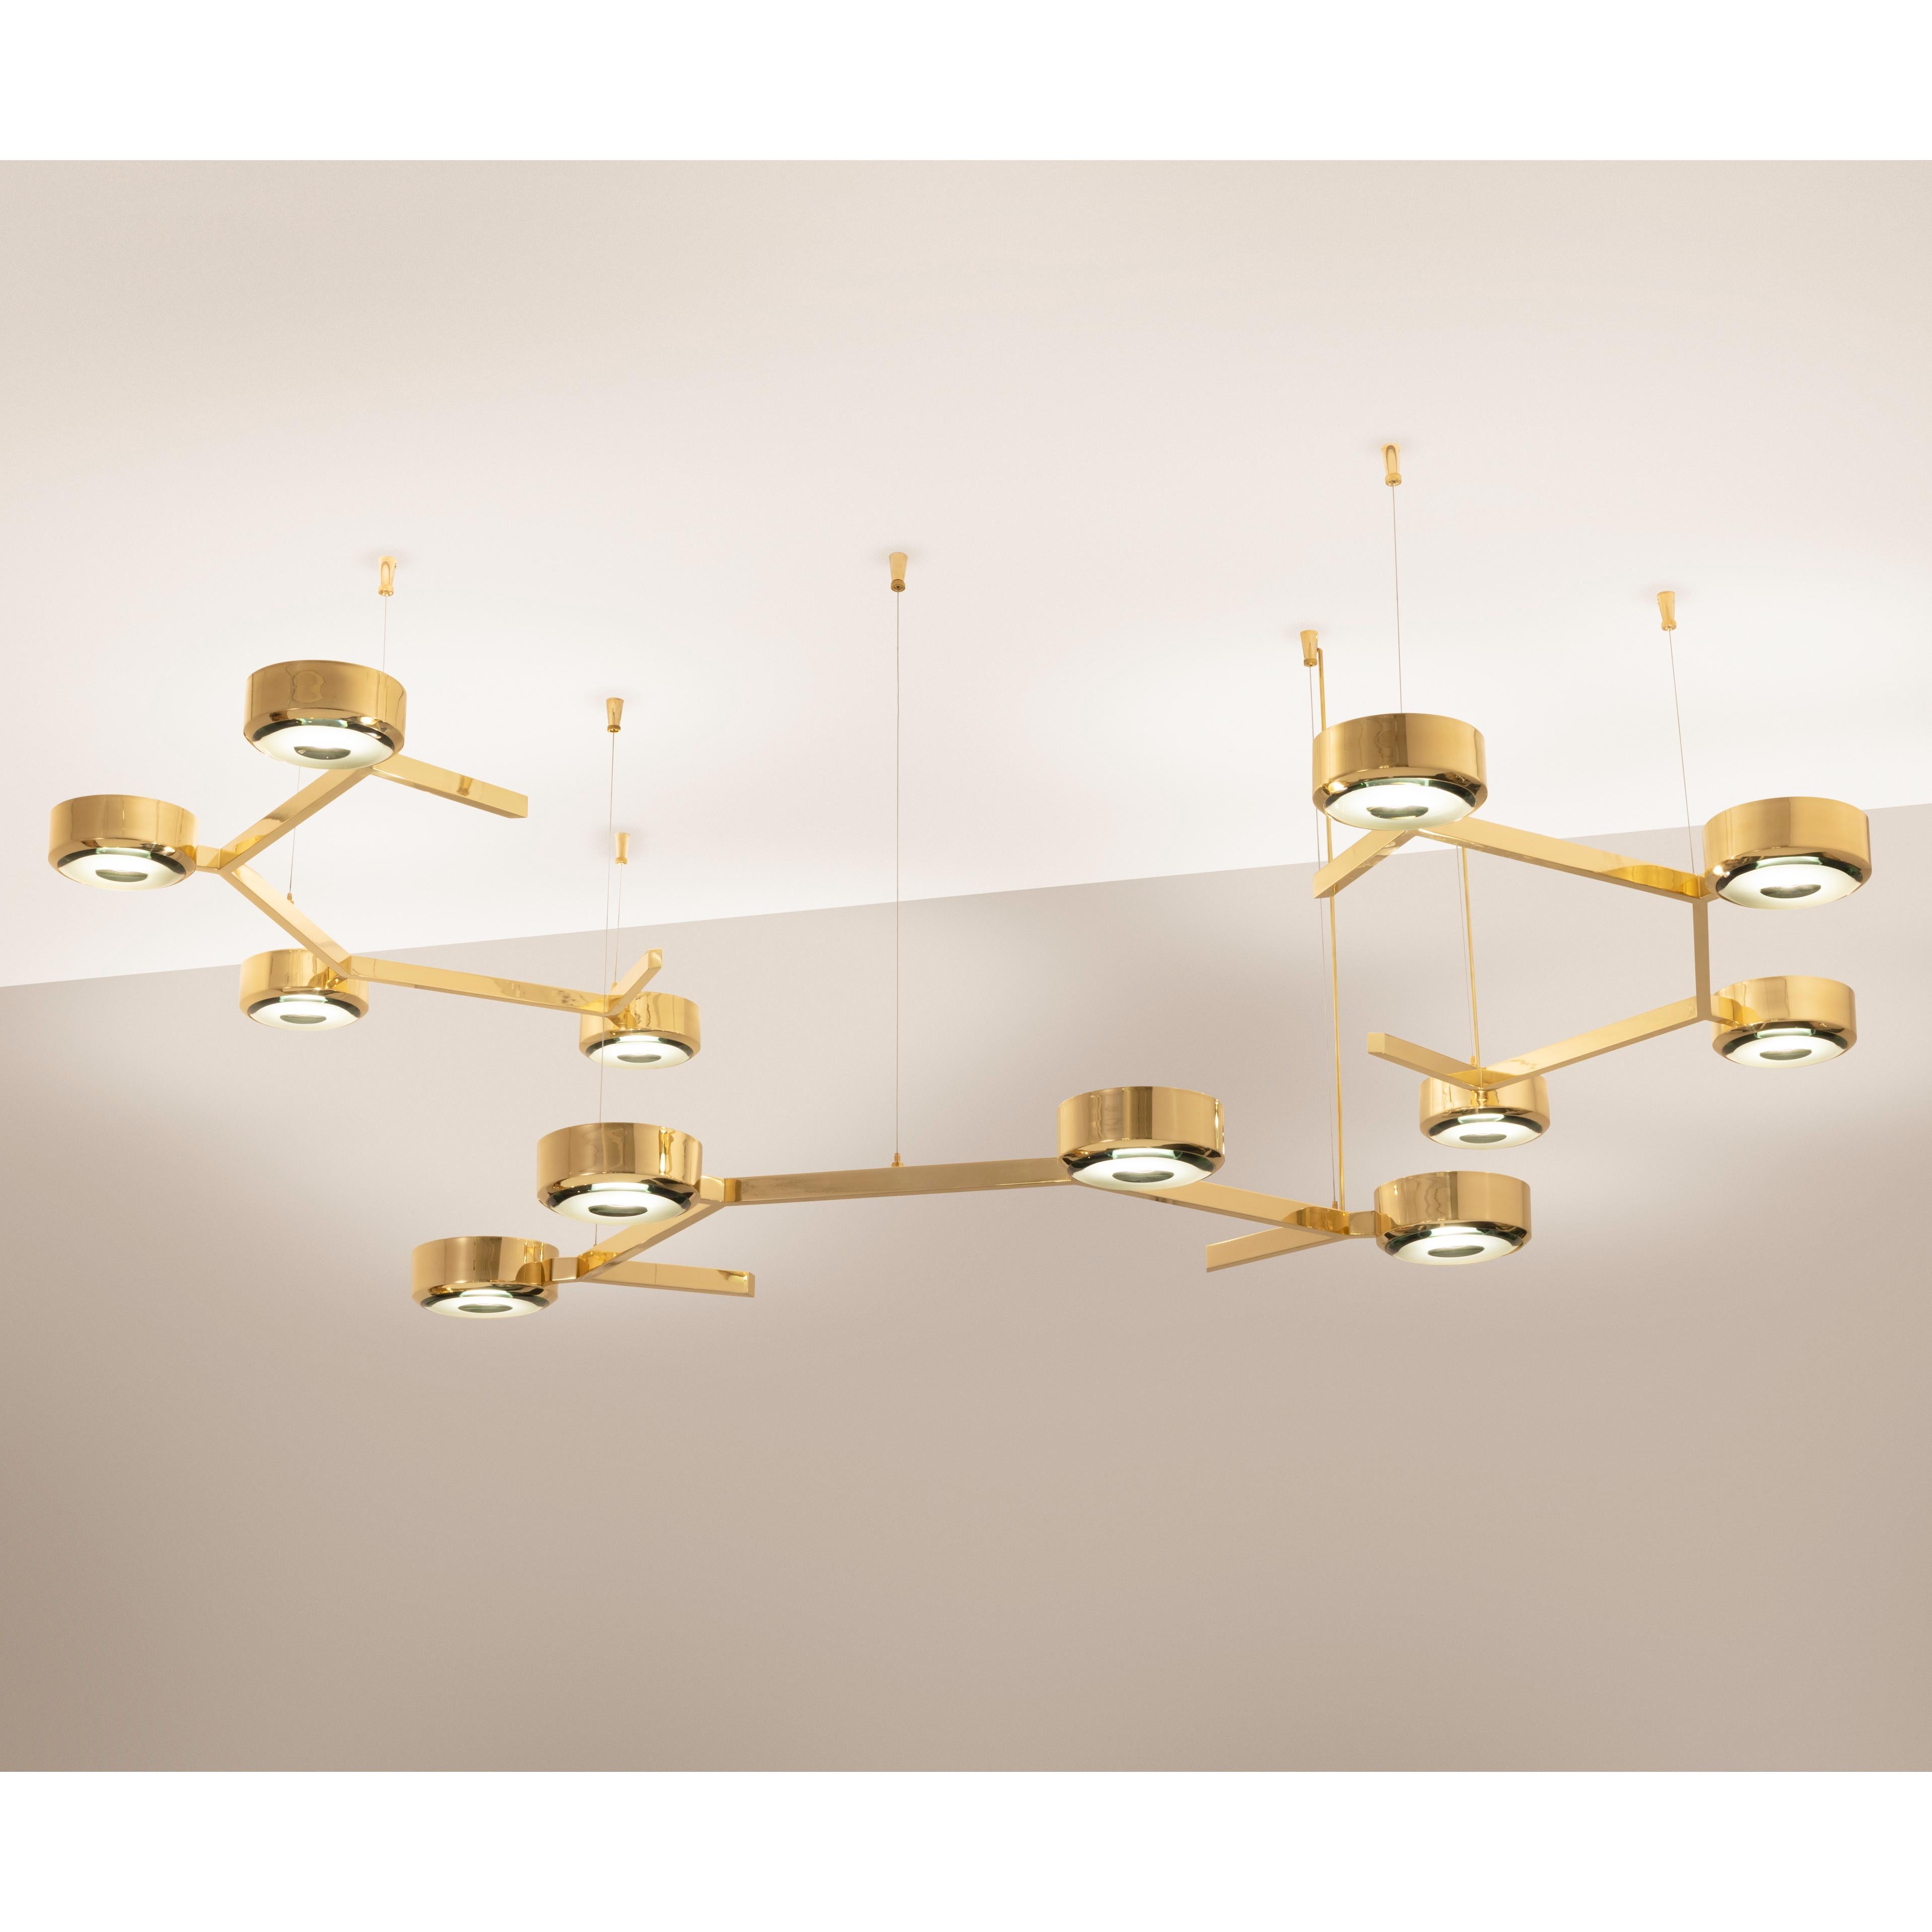 Italian Elemento Ceiling Light by form A